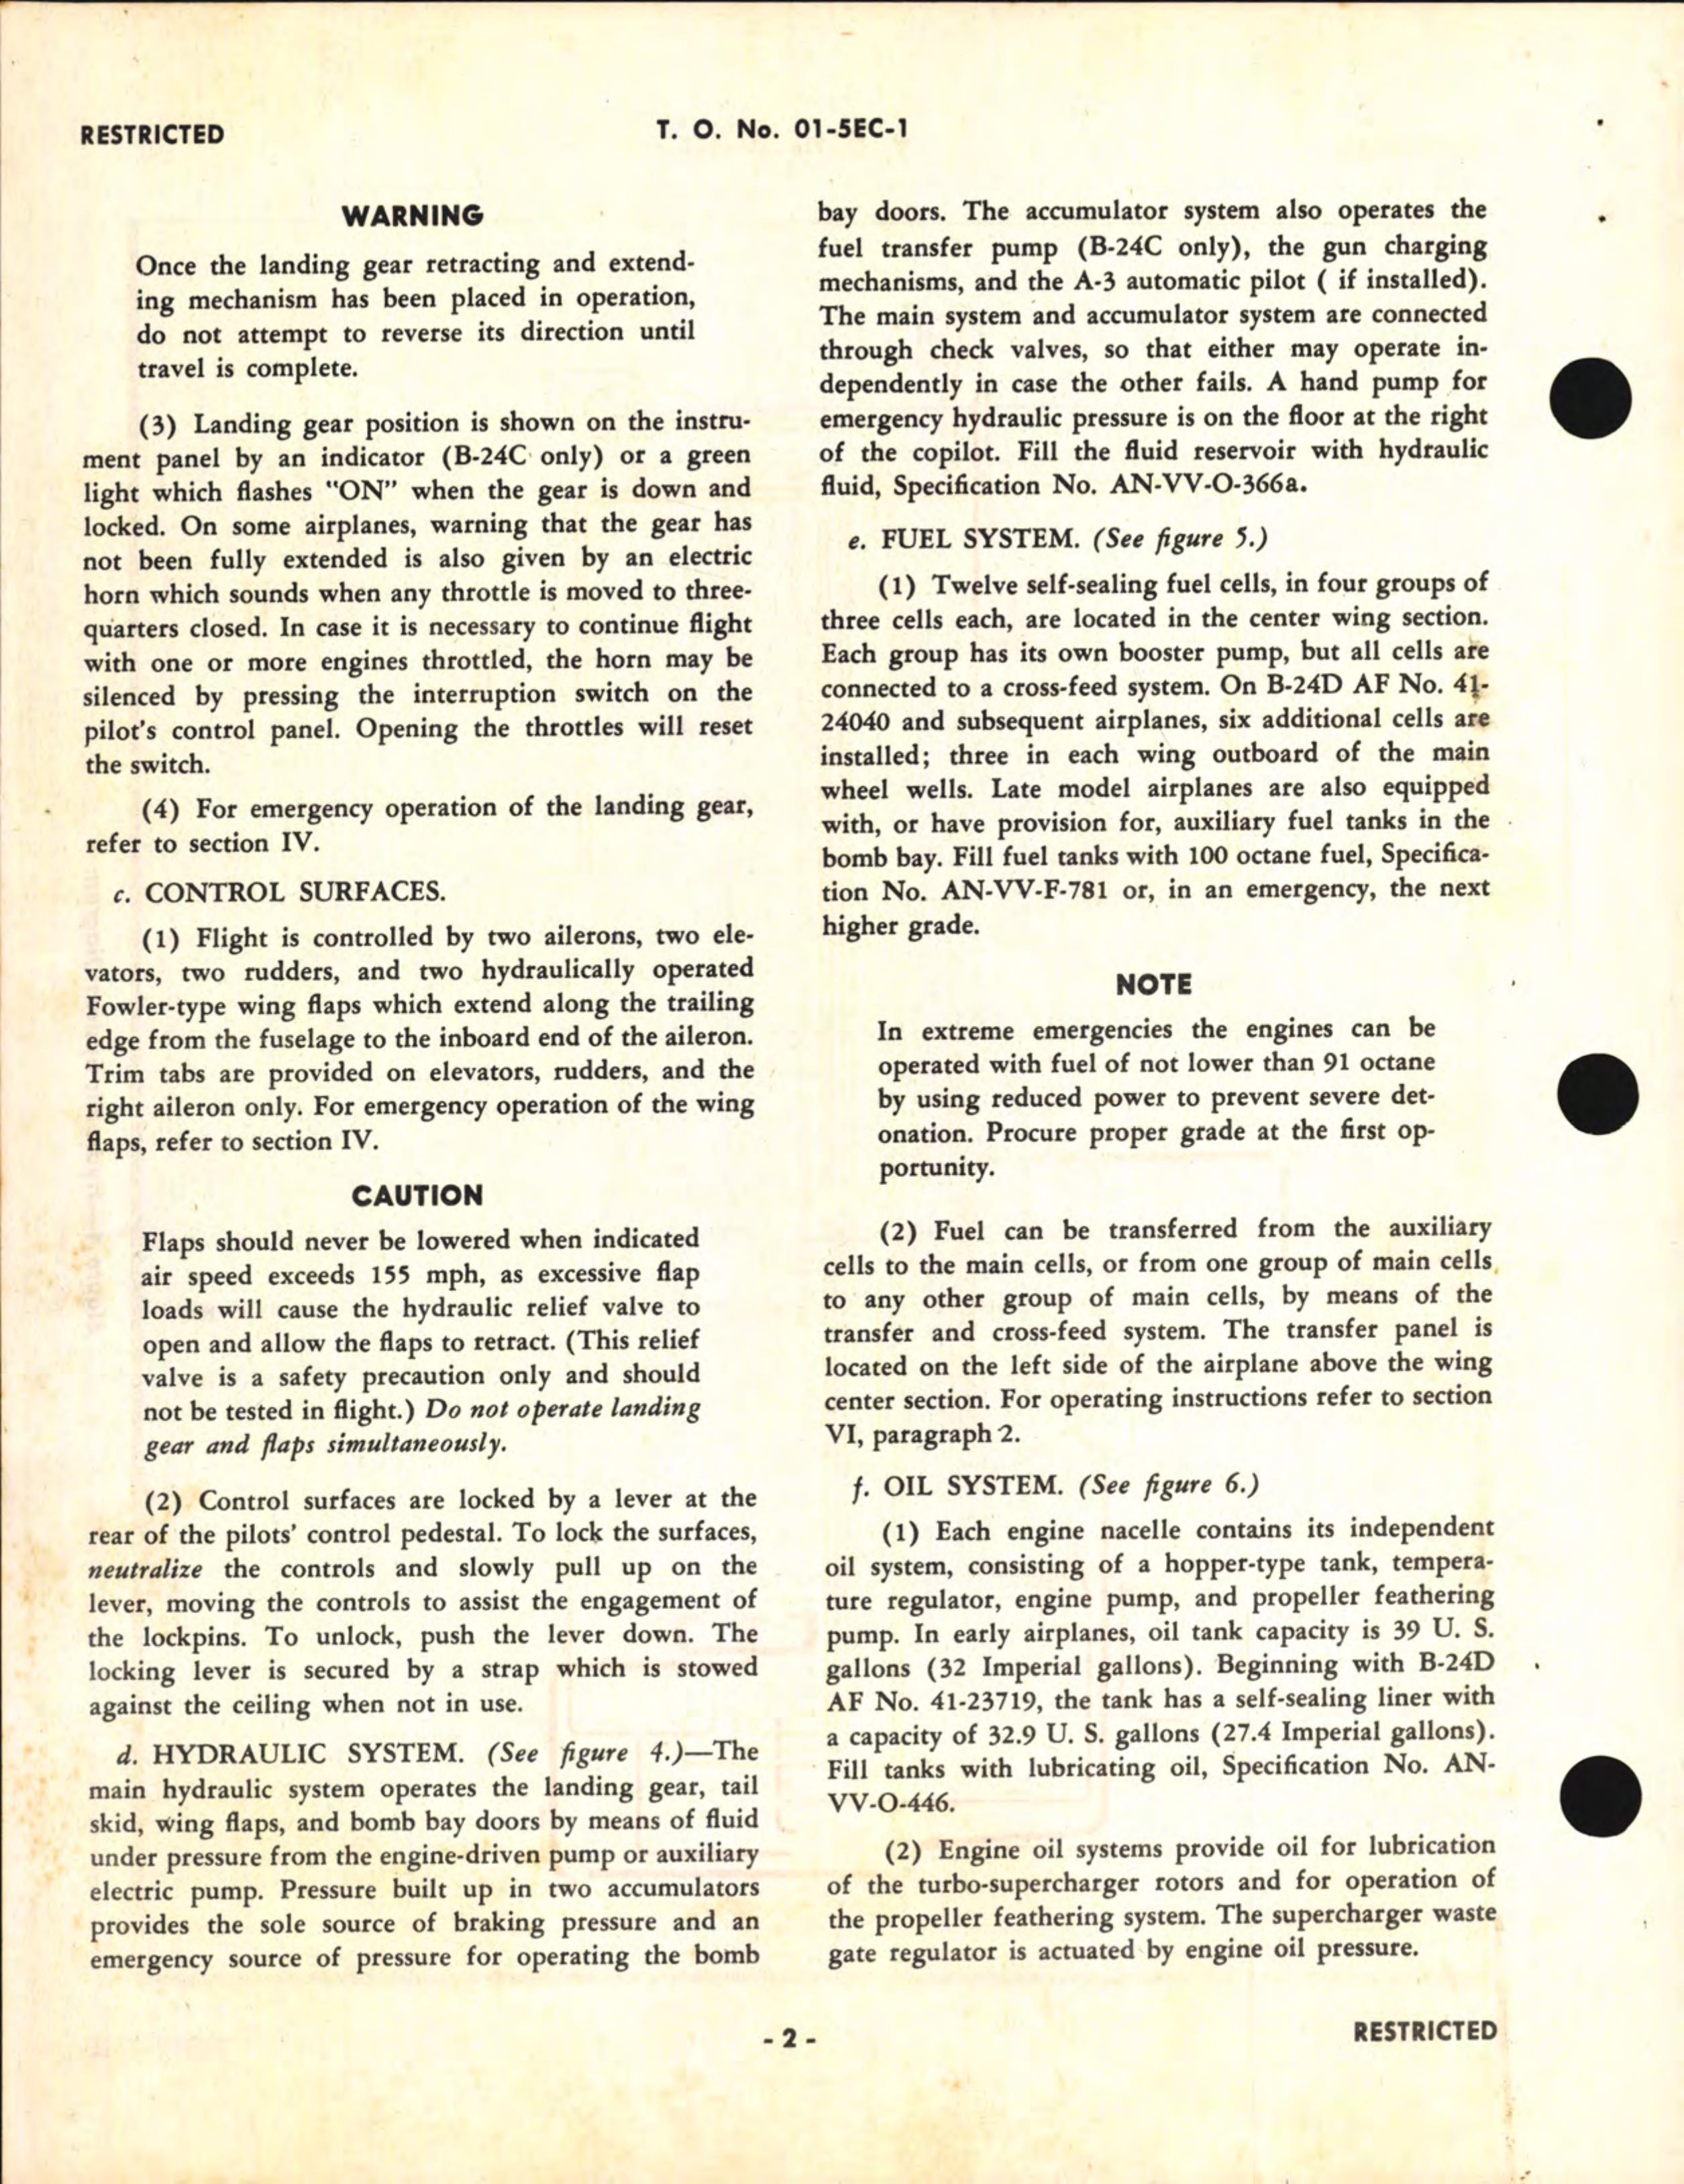 Sample page 8 from AirCorps Library document: Pilot's Flight Operating Instructions for B-24C, D, E, and G